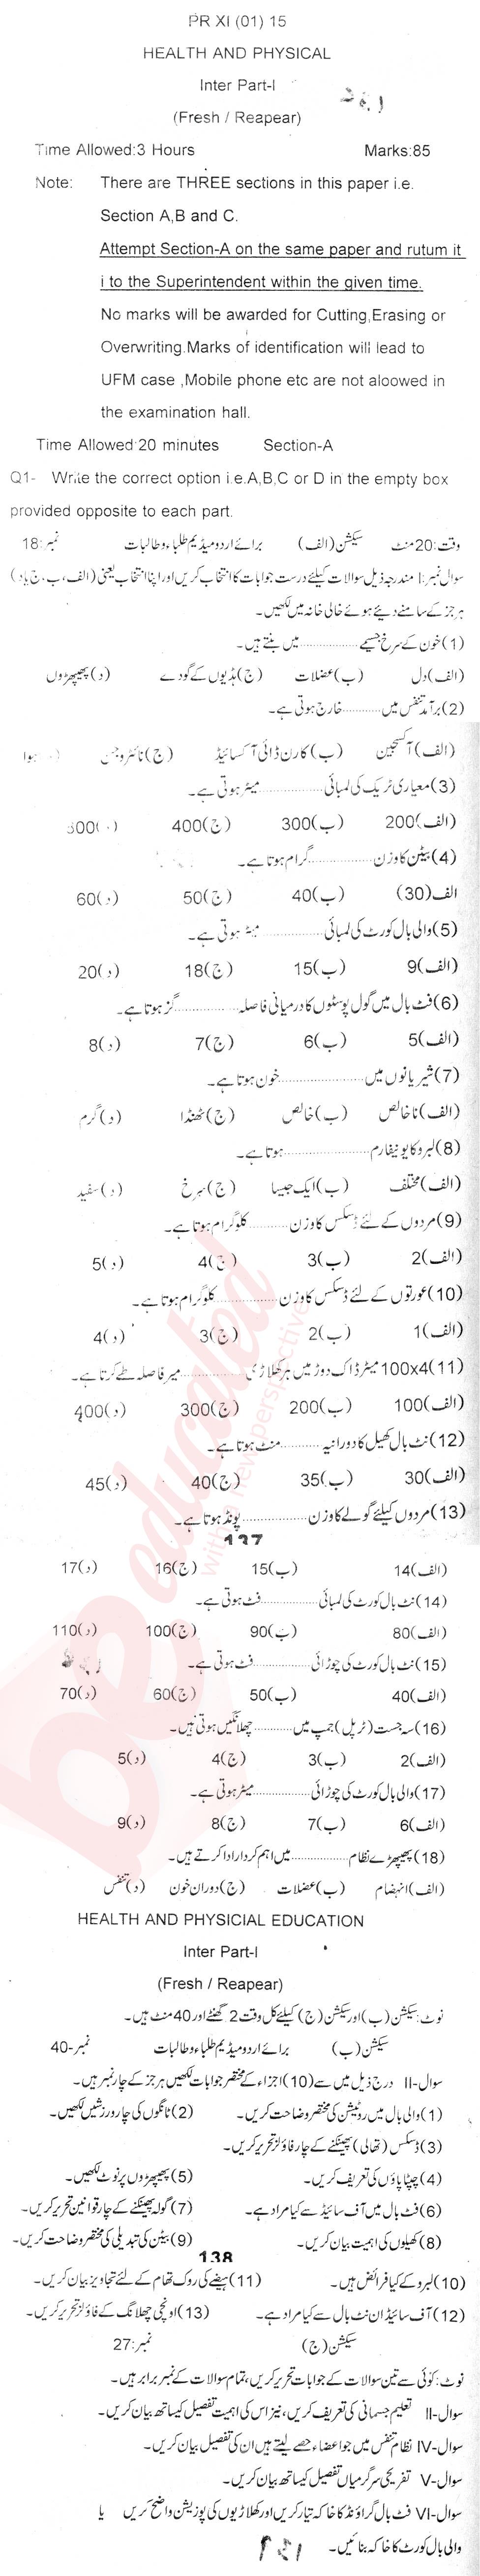 Health and Physical Education FA Part 1 Past Paper Group 1 BISE Bannu 2015